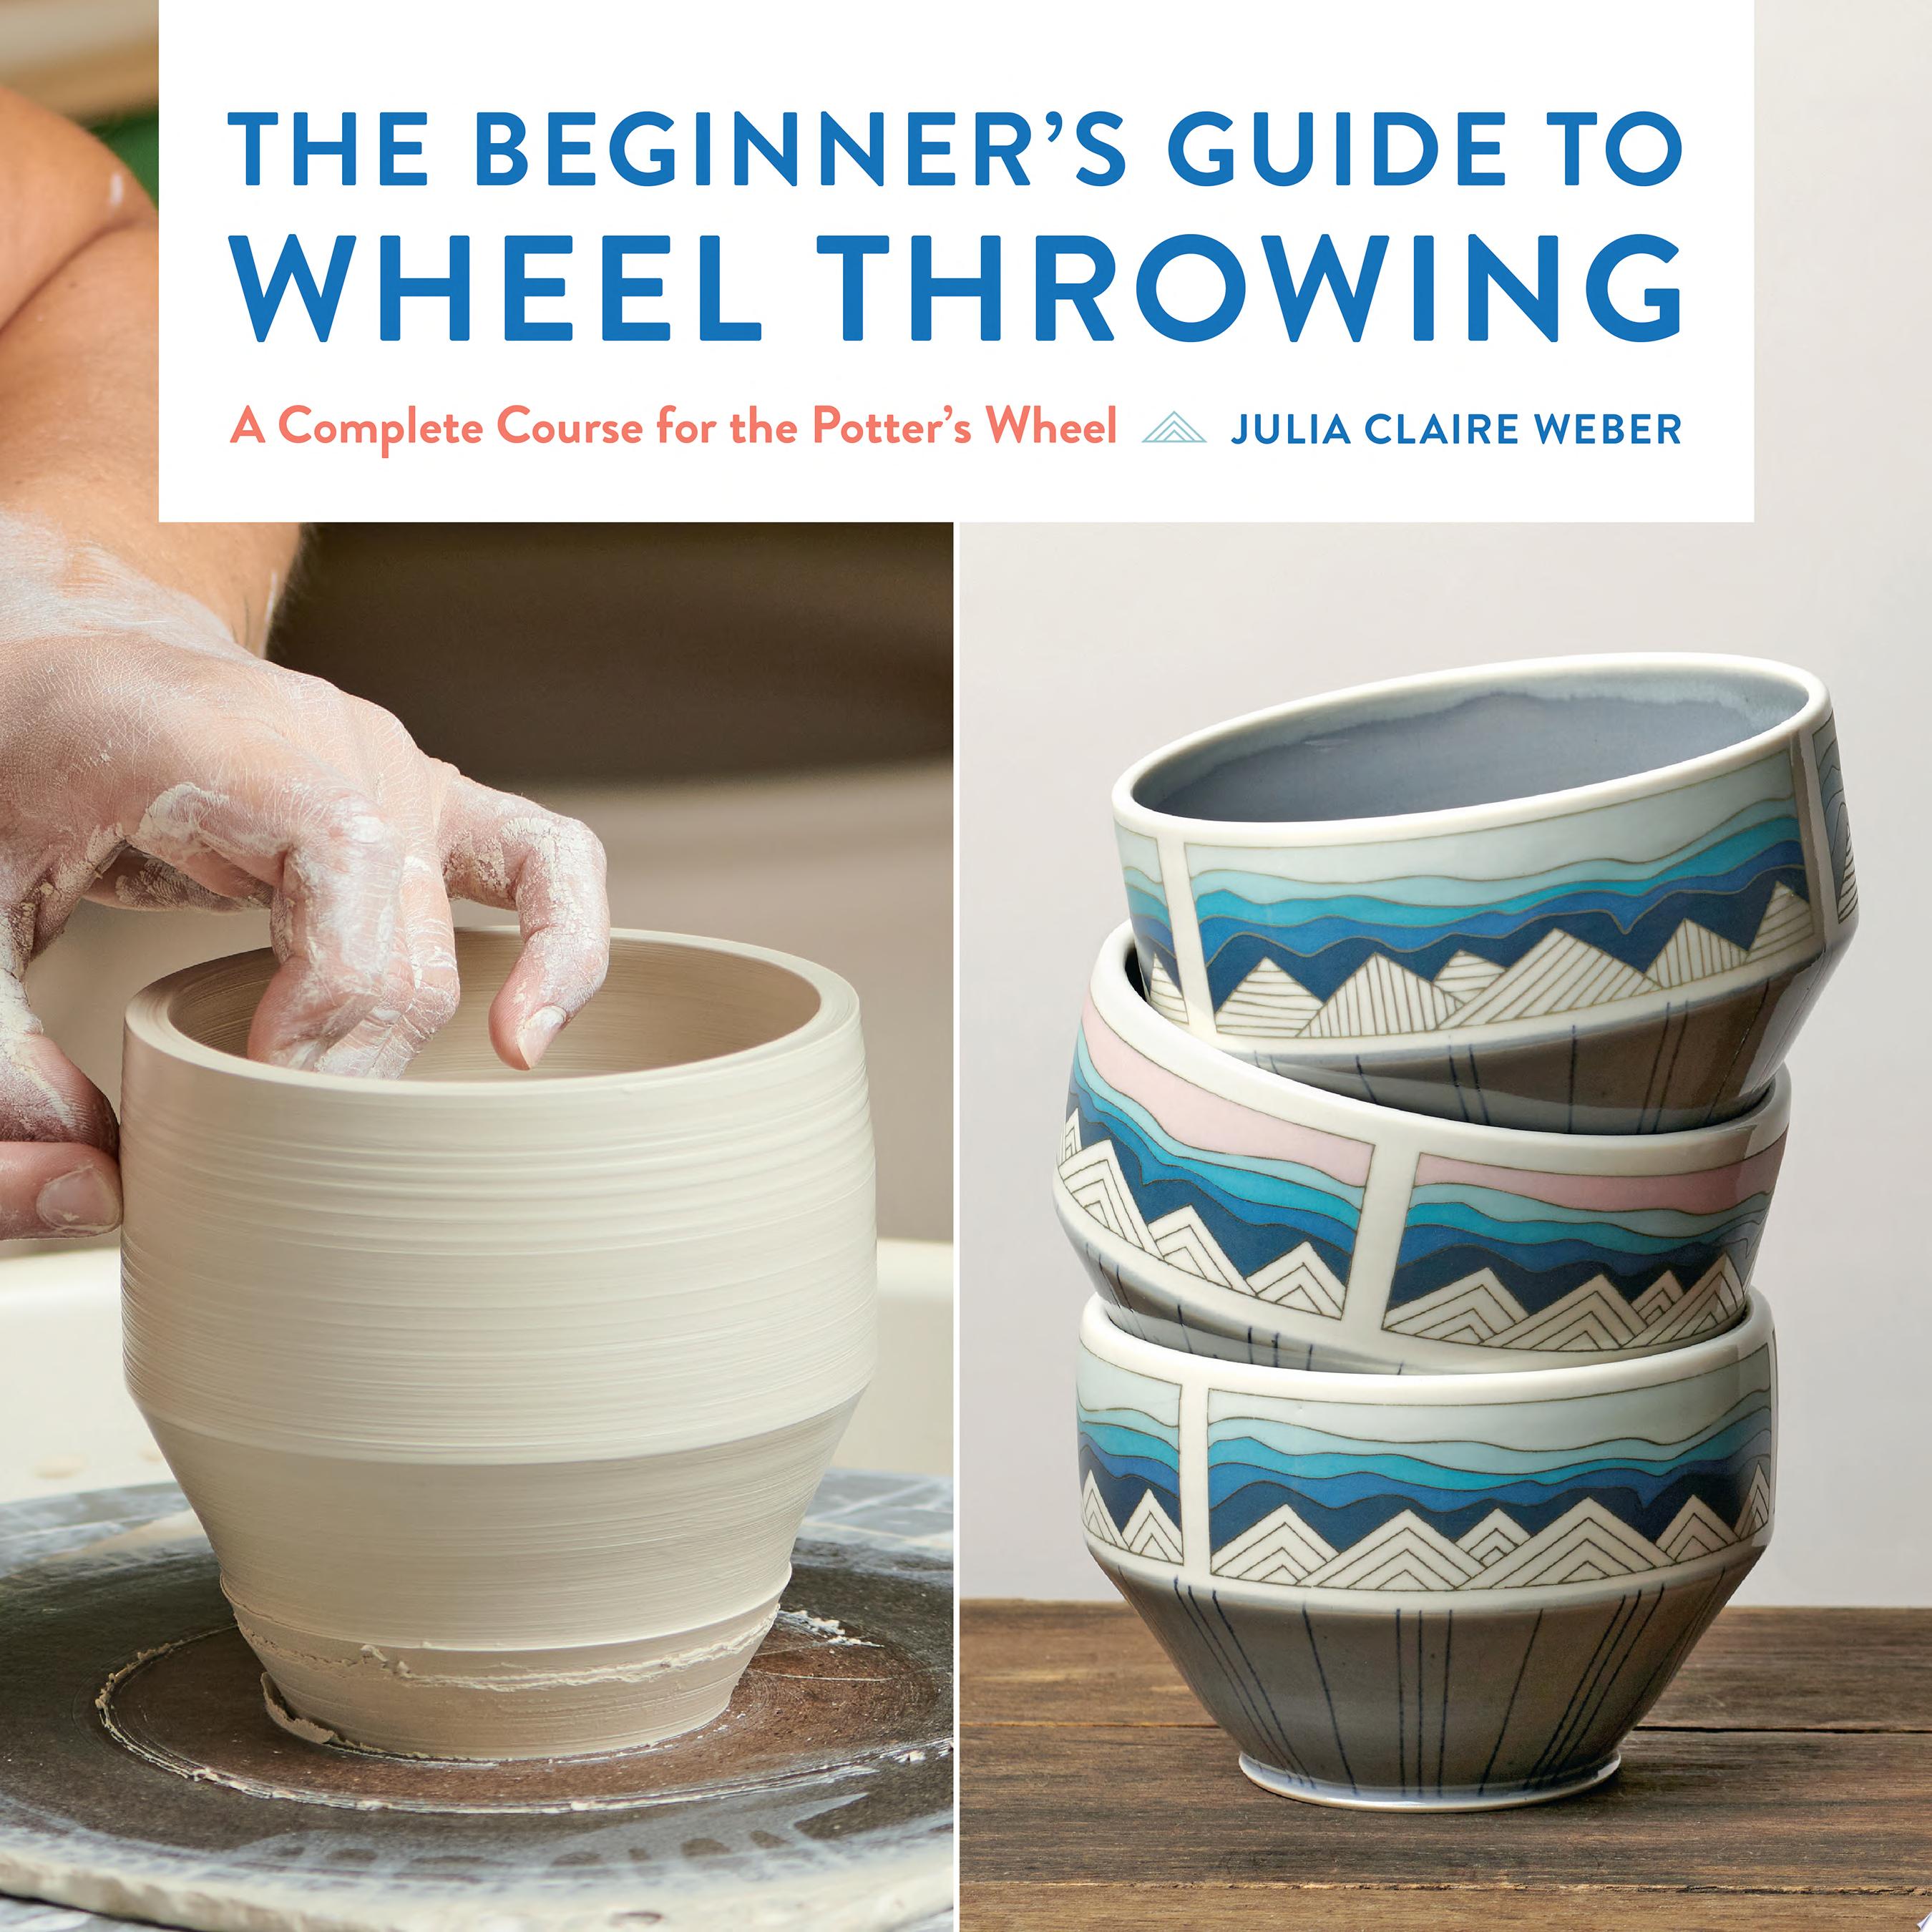 Image for "The Beginner&#039;s Guide to Wheel Throwing"